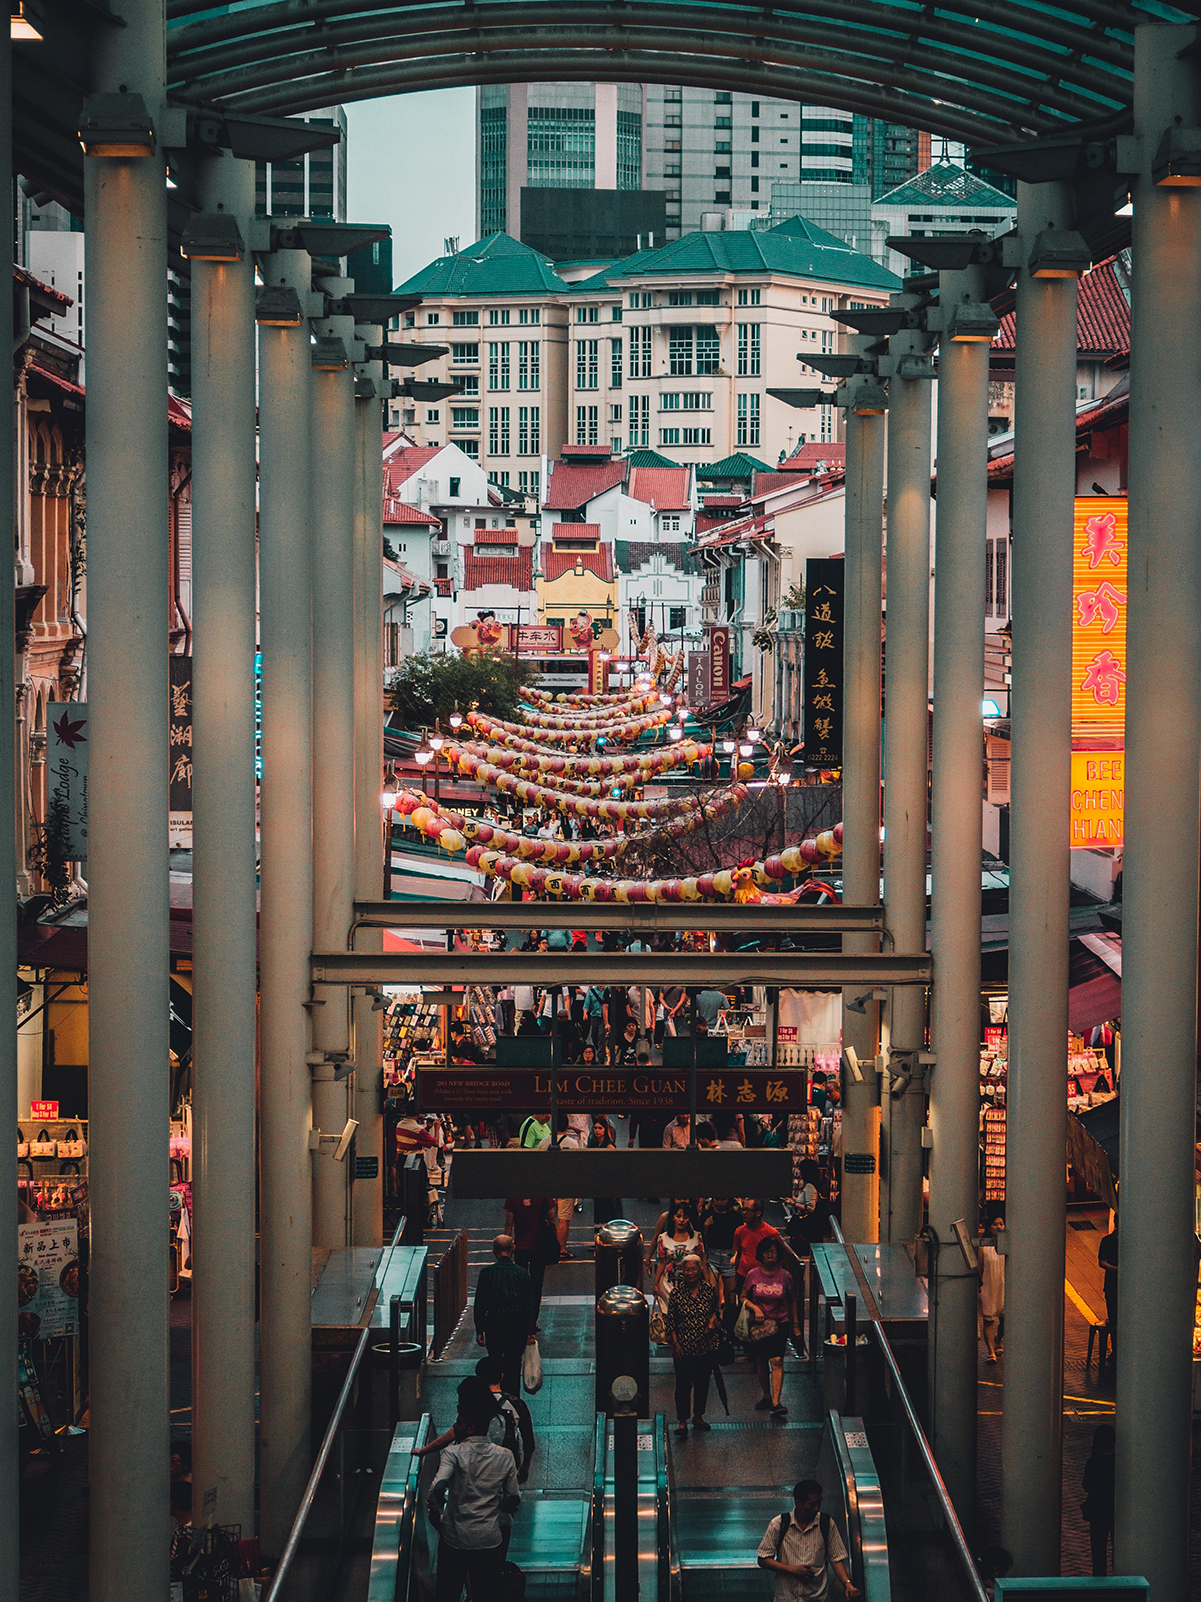 A picture of Chinatown